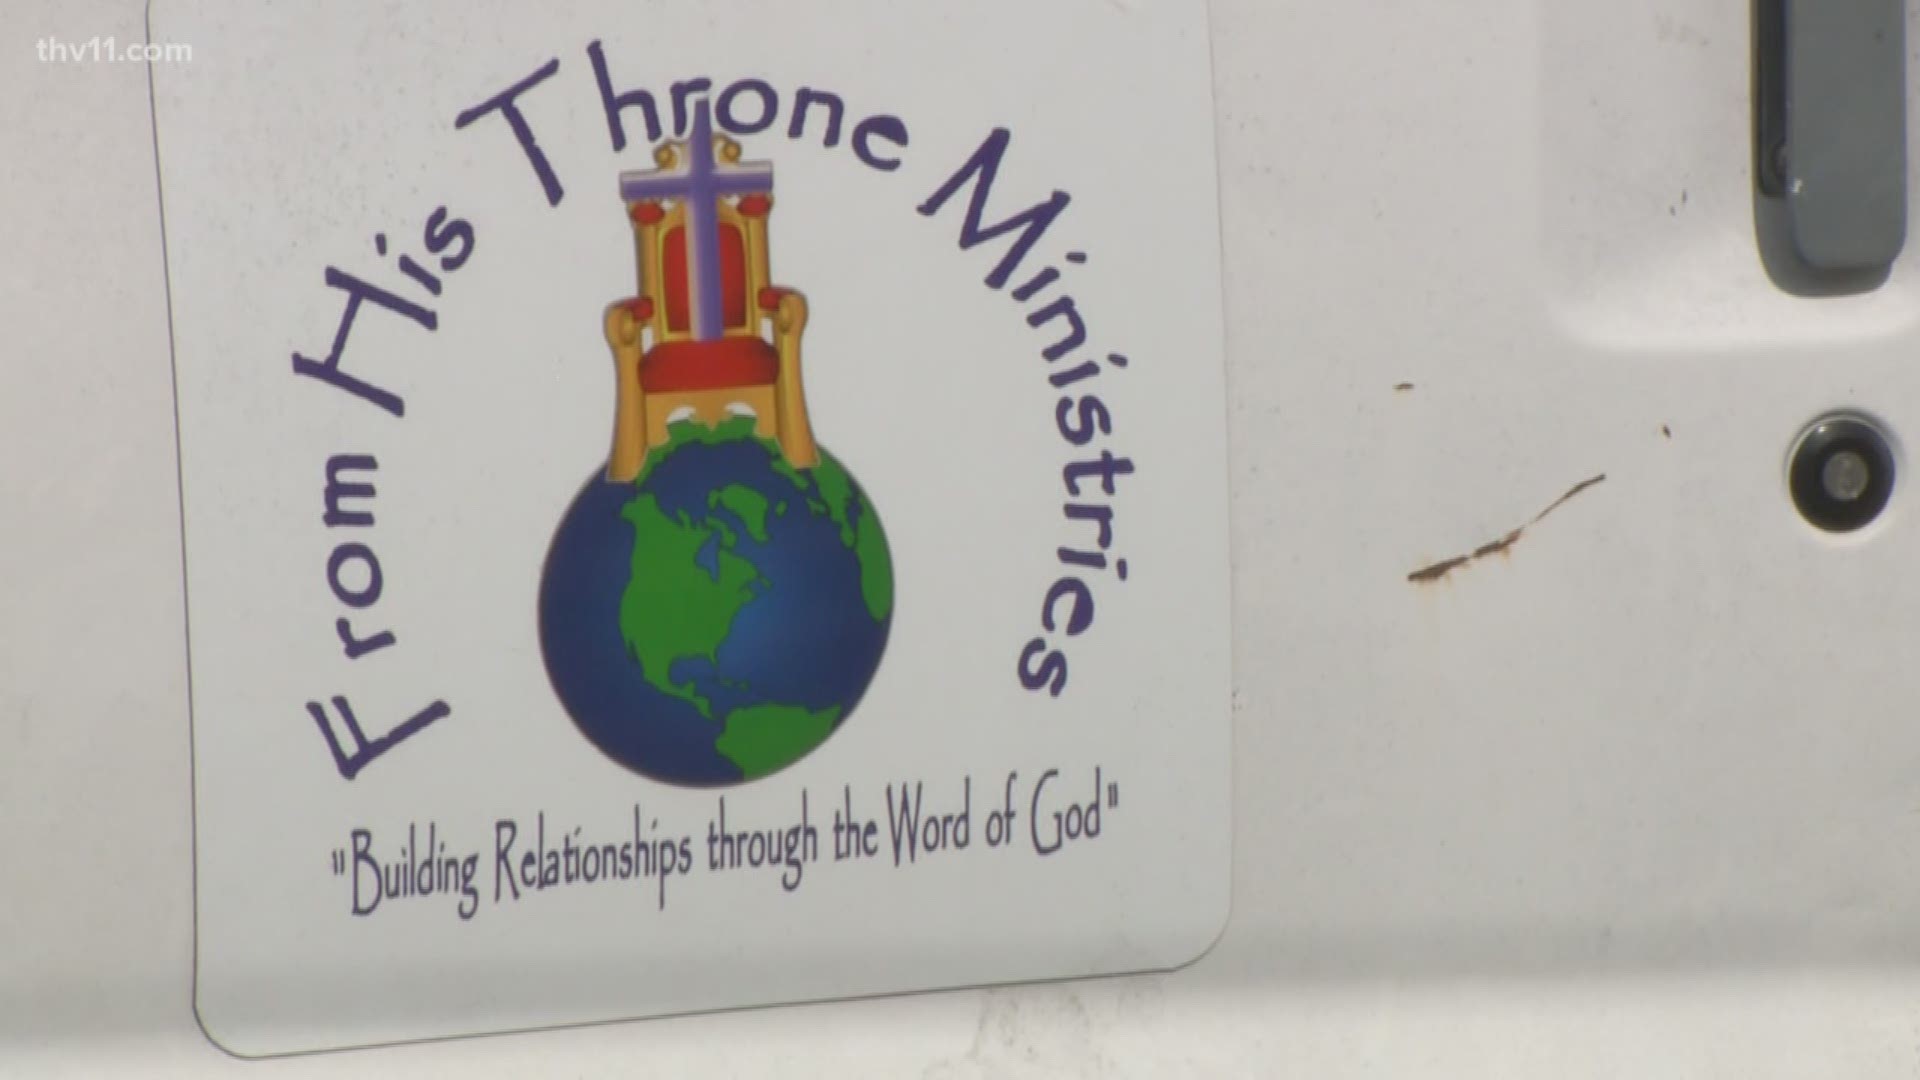 Volunteers at 'From His Throne Ministries' say the hot temperatures are making it almost impossible for people in need to walk to the church to eat a hot meal.